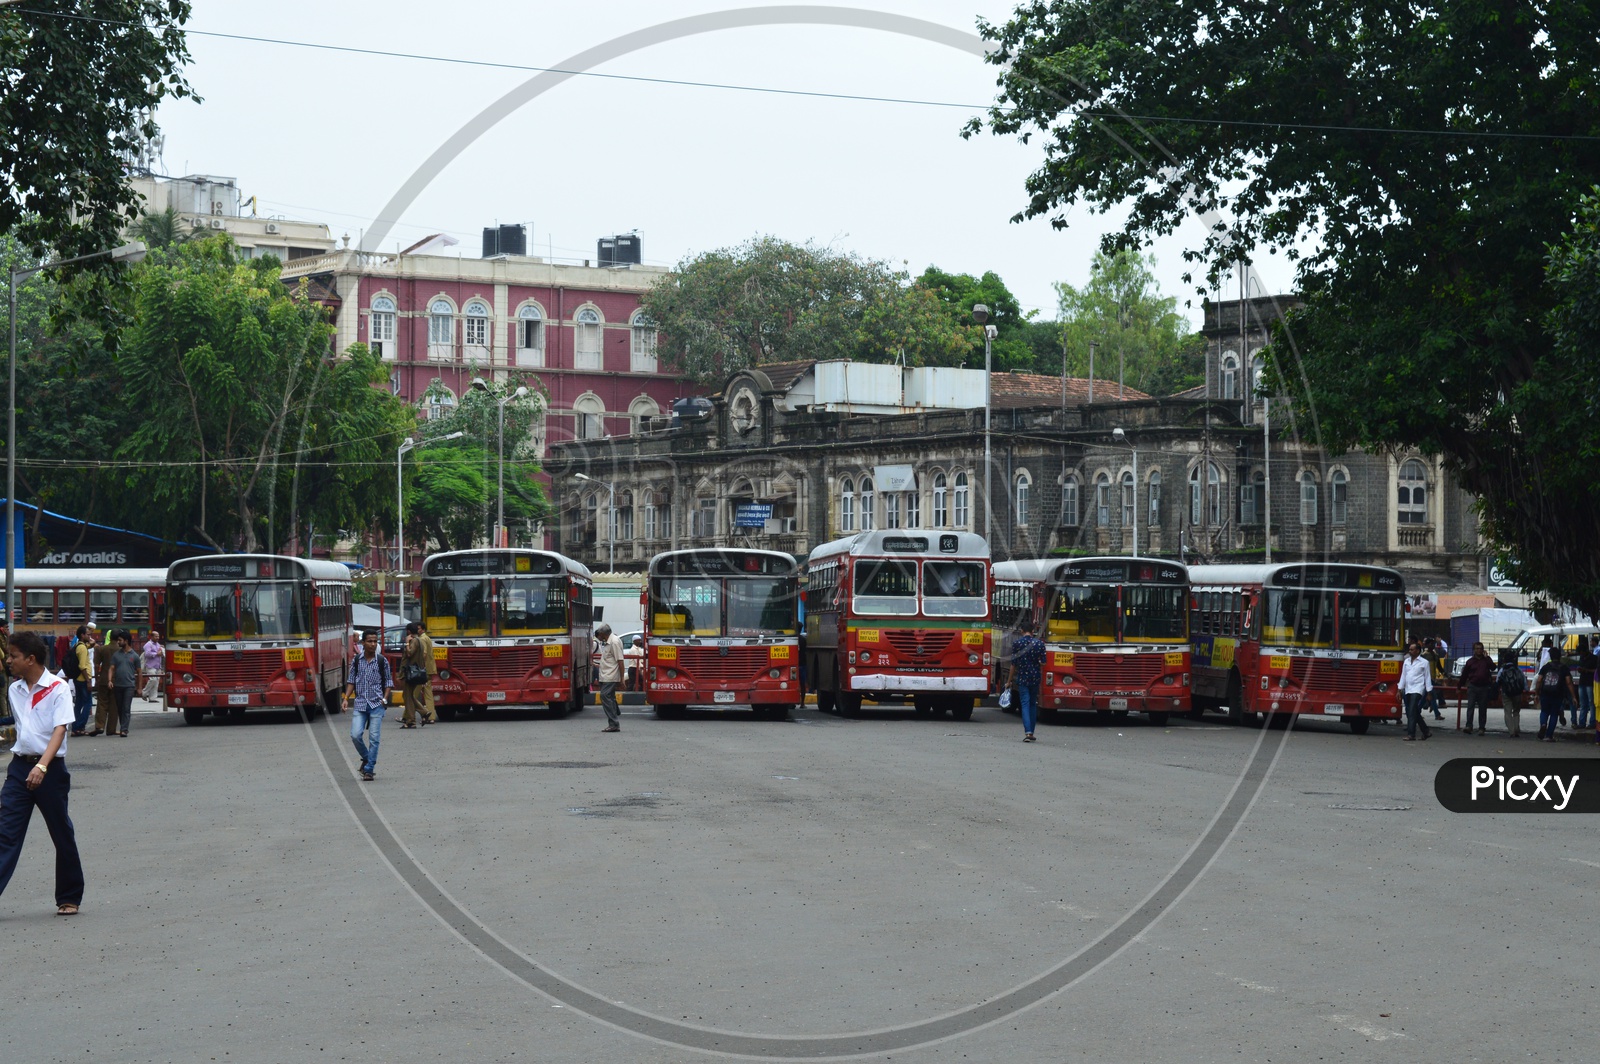 Buses in the bus stand